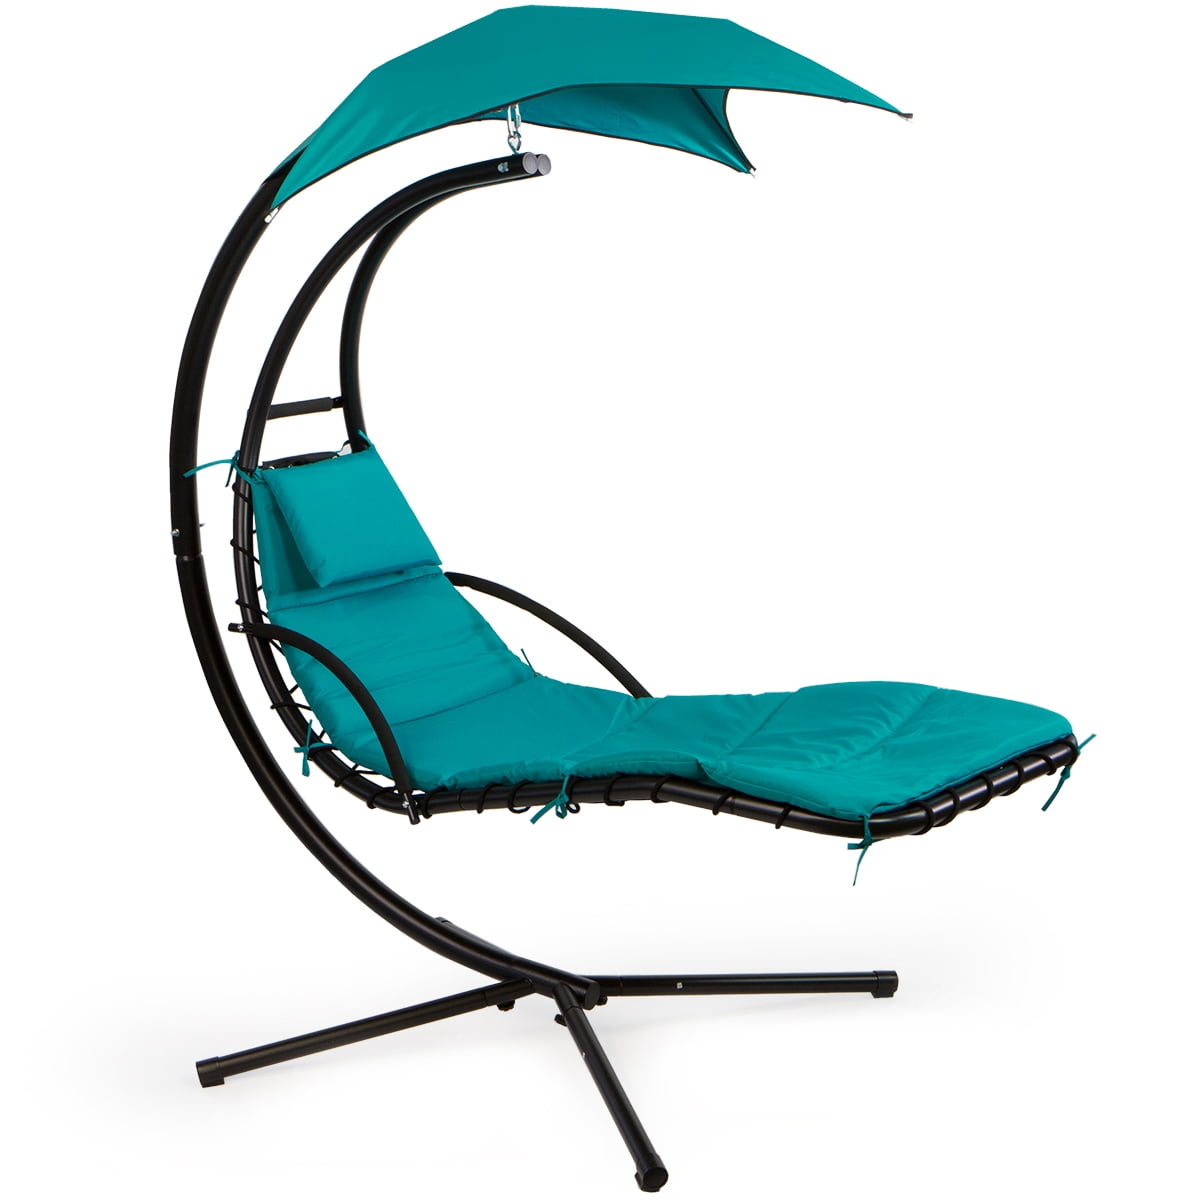 Barton Hanging Chaise Lounger Patio Chair Floating Canopy Swing